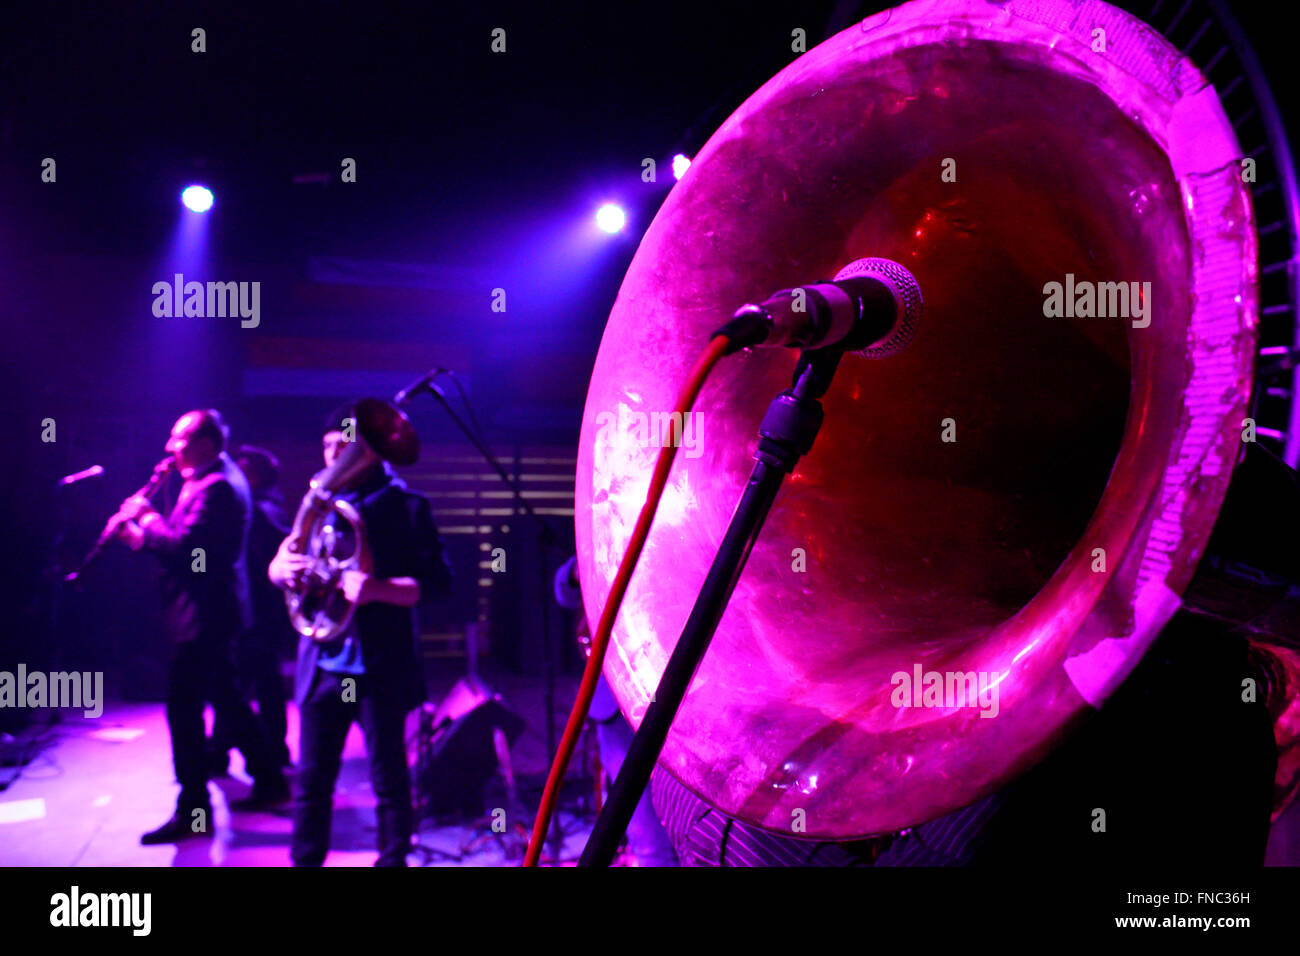 Front side Sousaphone brass instrument closeup and artists on stage. Luboyna band during BalkanFest festival, Thessaloniki, GR Stock Photo